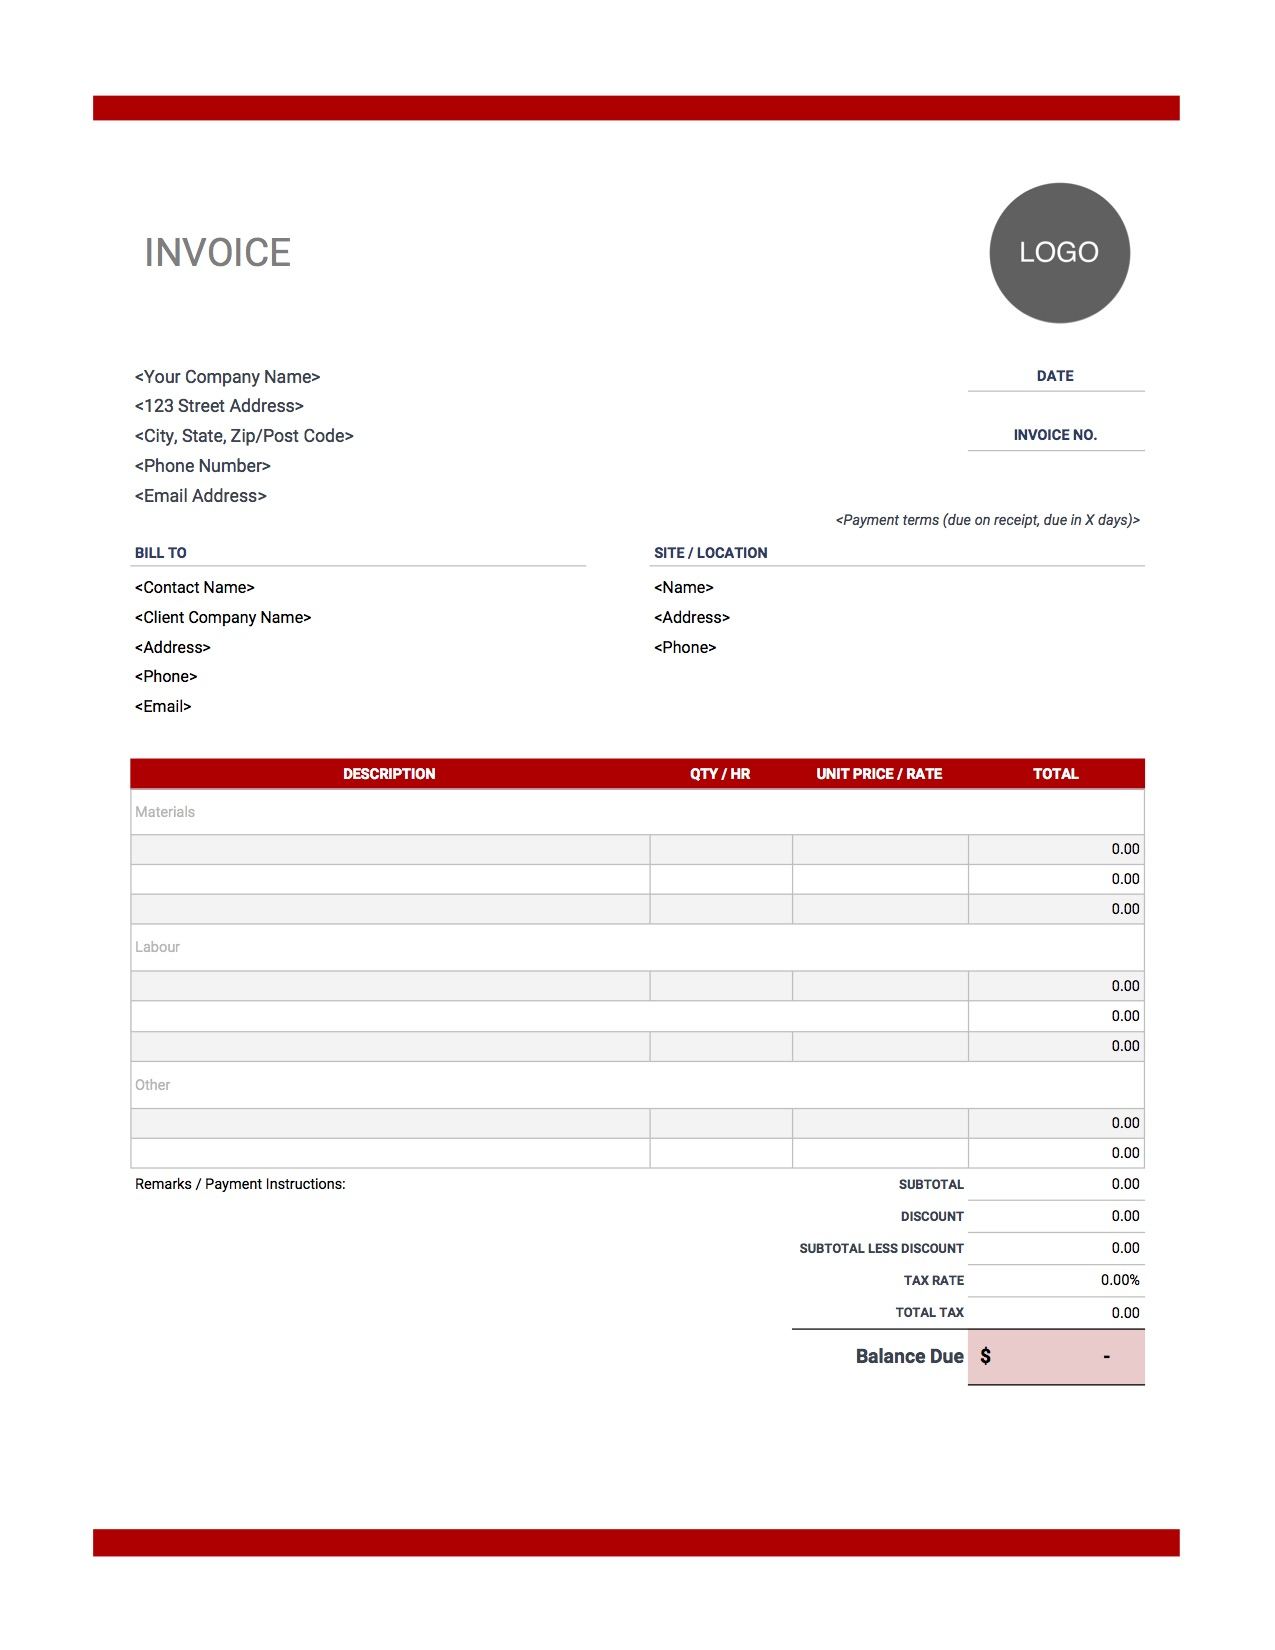 Invoice For Work Done Template from www.invoicesimple.com